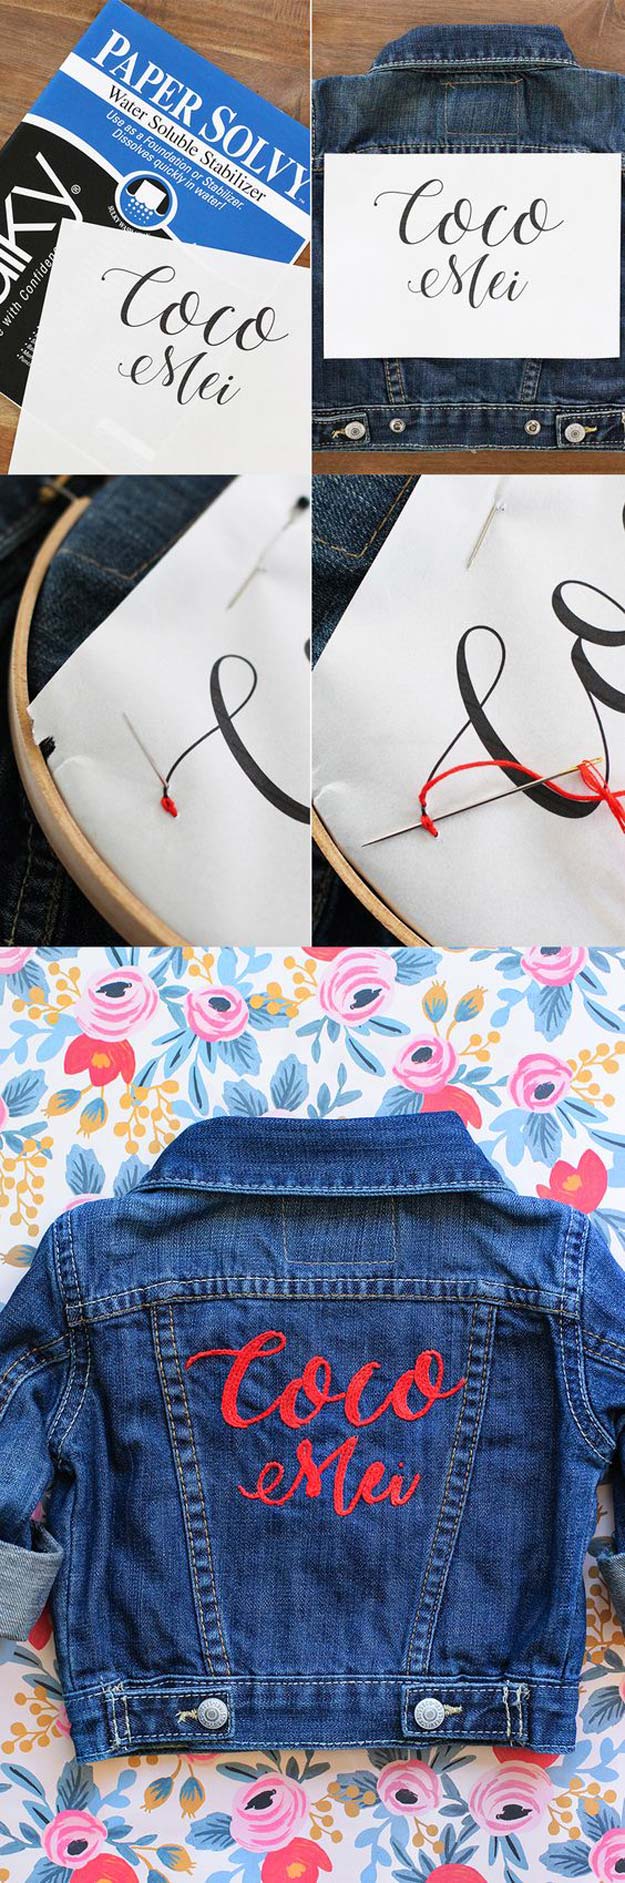 Cool Embroidery Projects for Teens - Step by Step Embroidery Tutorials - Cool Embroidery Projects for Teens - Step by Step Embroidery Tutorials - project name here - Awesome Embroidery Projects for Teenagers - Cool Embroidery Crafts for Girls - Creative Embroidery Designs - Best Embroidery Wall Art, Room Decor - Great Embroidery Gifts, Free Embroidery Patterns for Girls, Women and Tweens - Awesome Embroidery Projects for Teenagers - Cool Embroidery Crafts for Girls - Creative Embroidery Designs - Best Embroidery Wall Art, Room Decor - Great Embroidery Gifts, Free Embroidery Patterns for Girls, Women and Tweens 